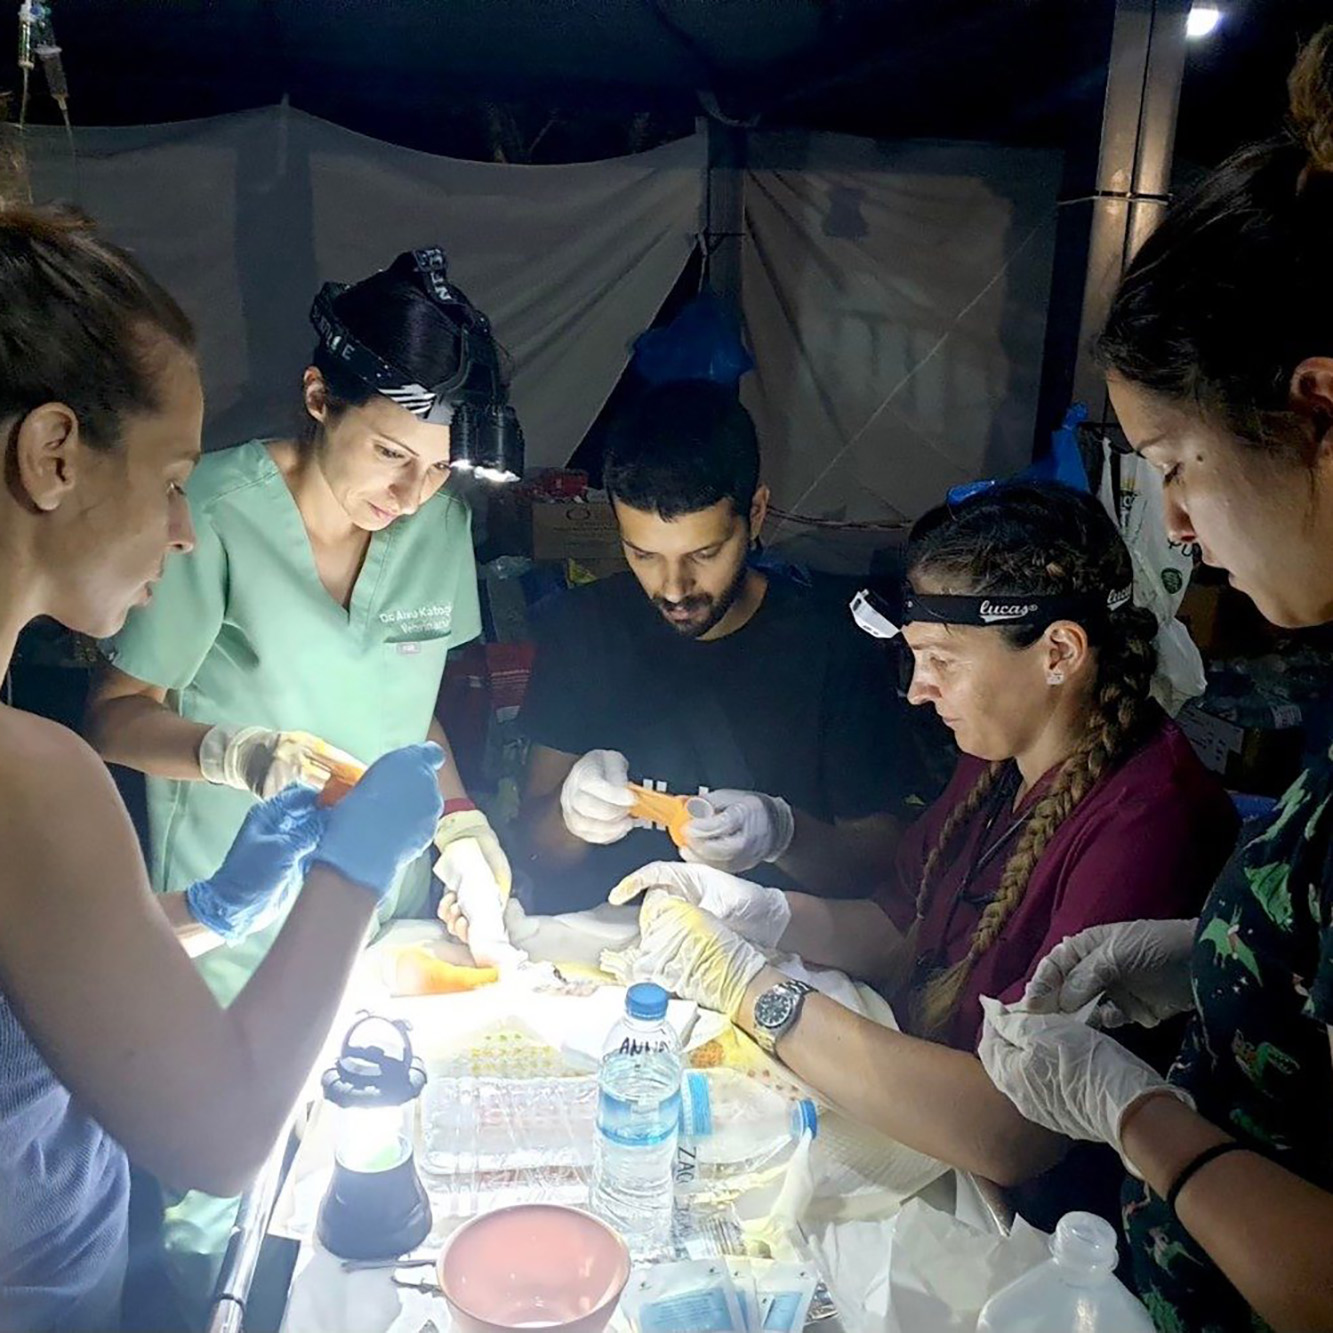 Group of veterinary professionals working around a small table in the dark with headlamps.